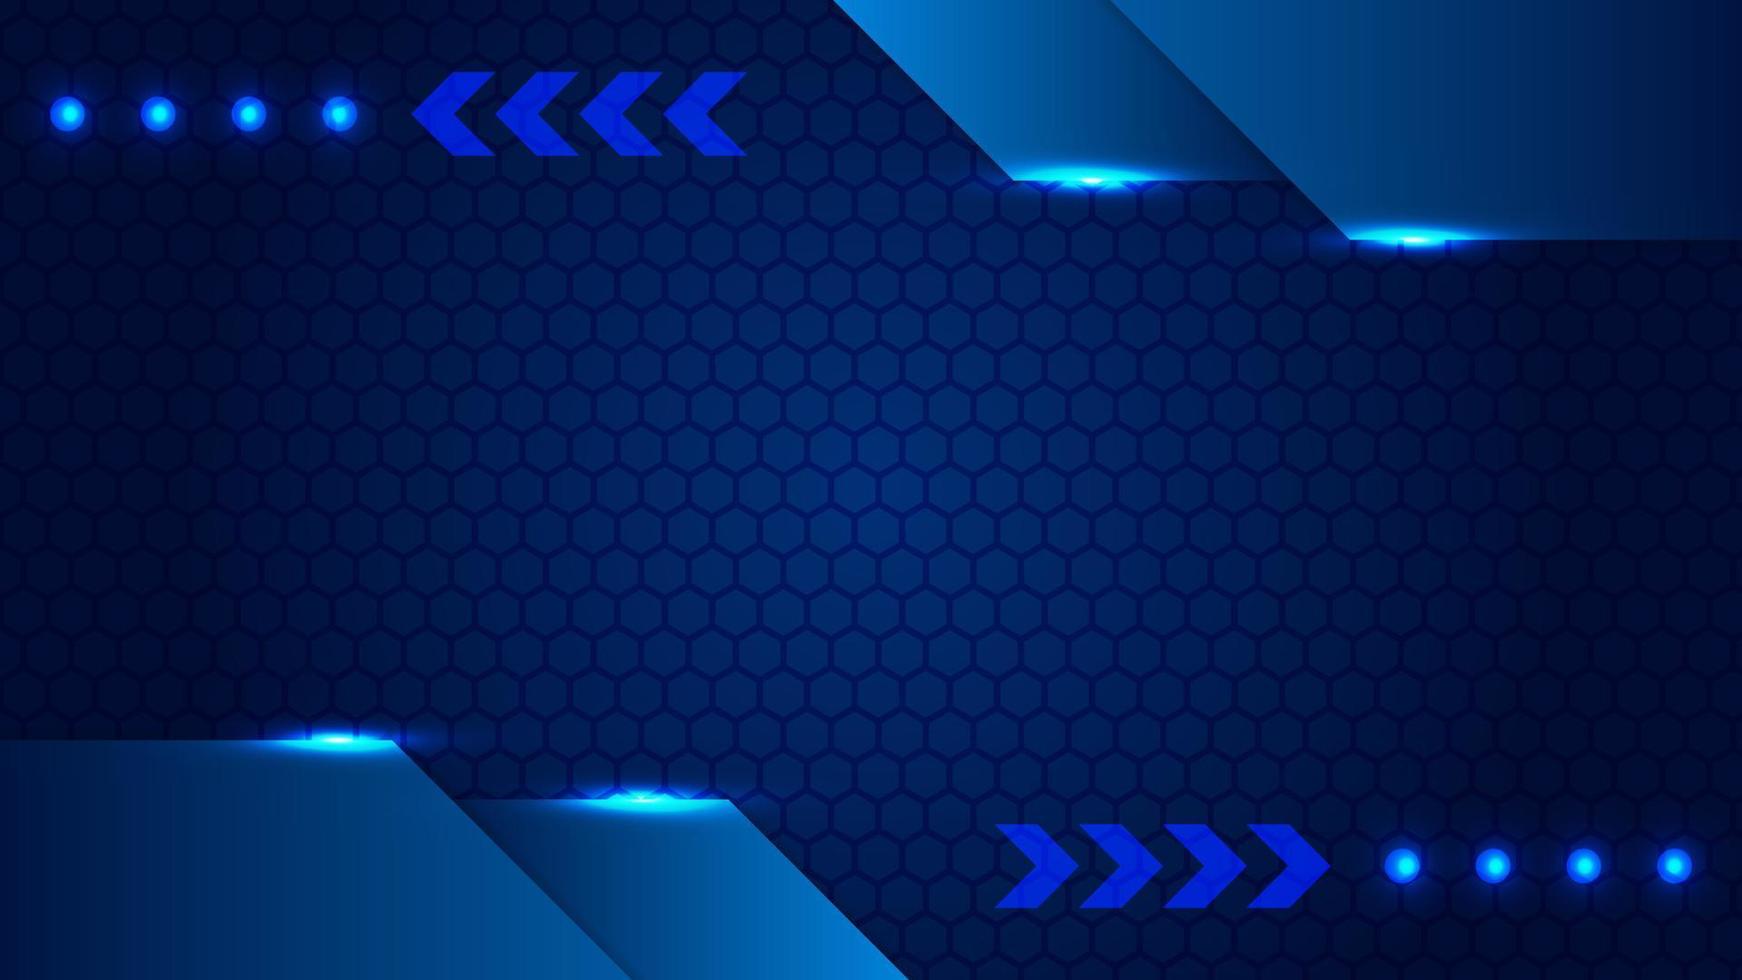 Abstract futuristic with hexagon texture and light effect technology background design. vector